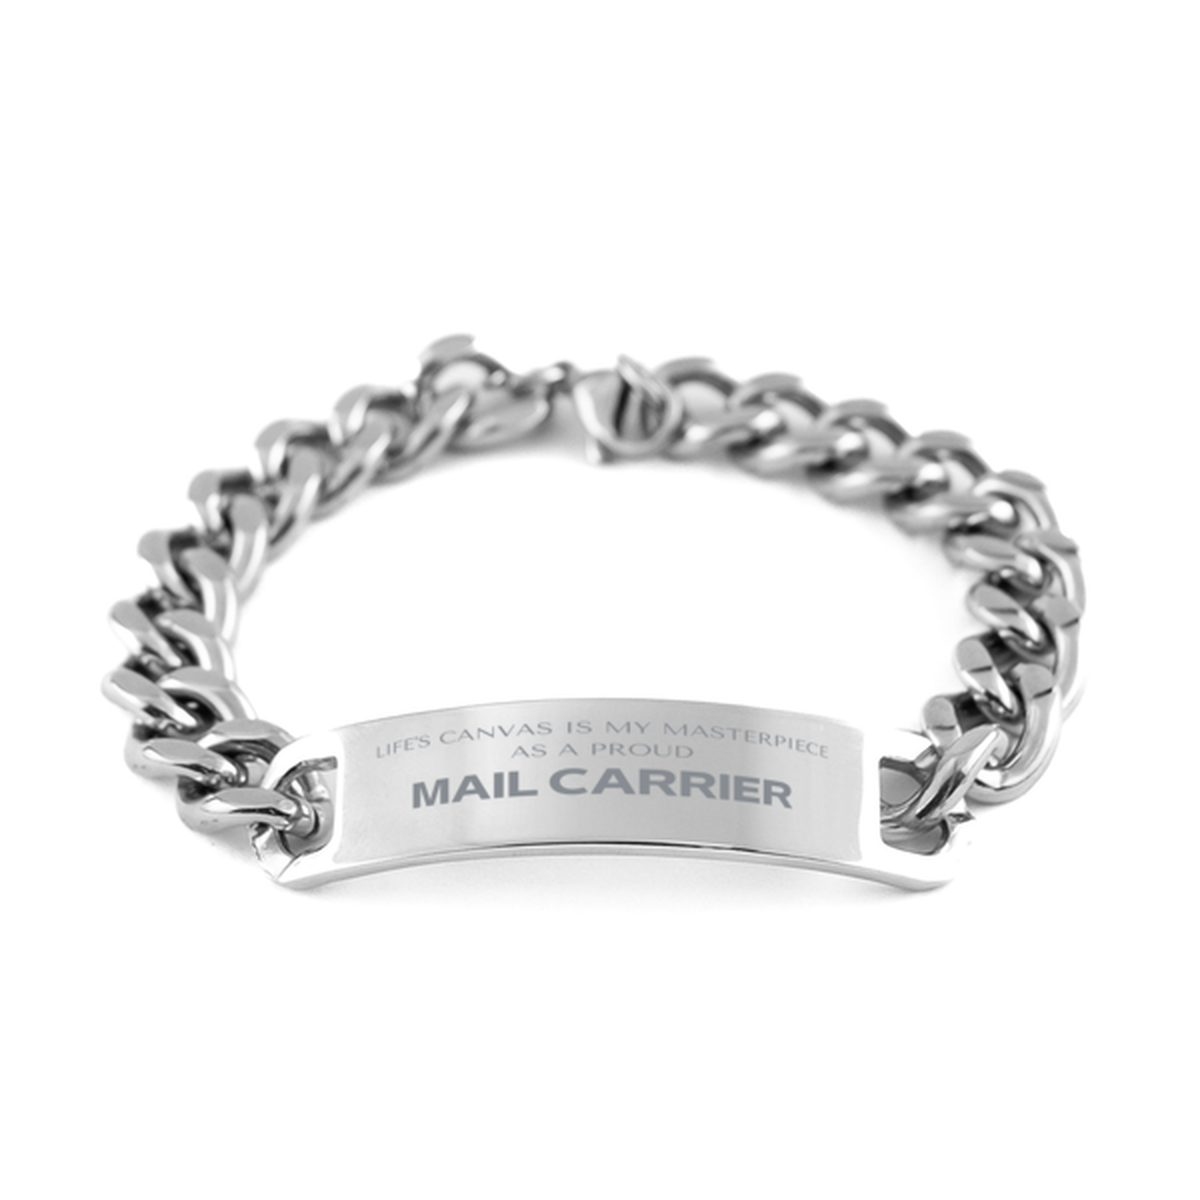 Proud Mail Carrier Gifts, Life's canvas is my masterpiece, Epic Birthday Christmas Unique Cuban Chain Stainless Steel Bracelet For Mail Carrier, Coworkers, Men, Women, Friends